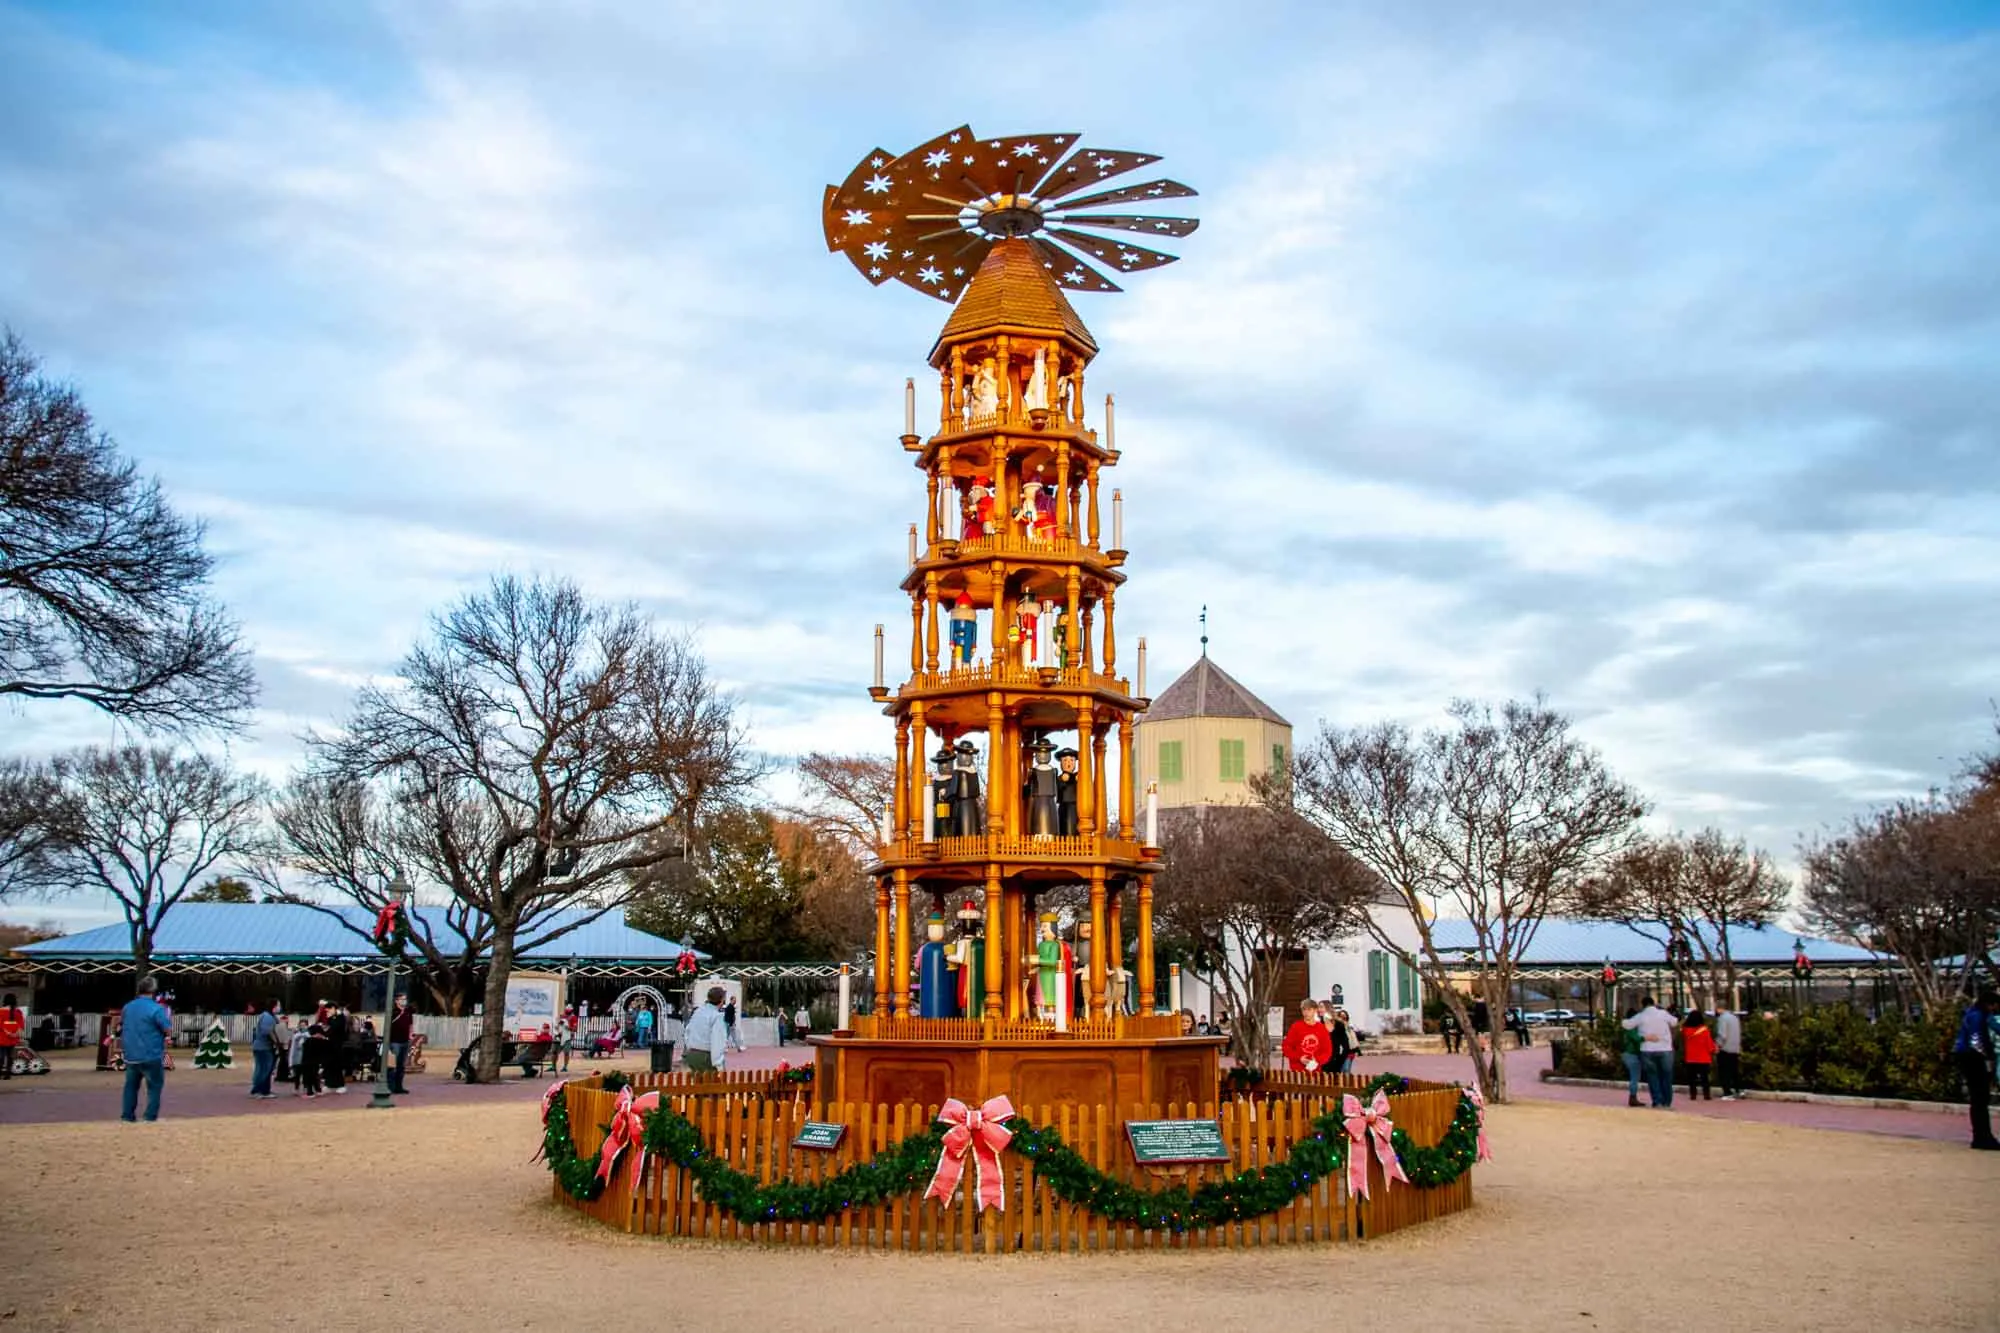 German Christmas pyramid with a propeller top in town square.